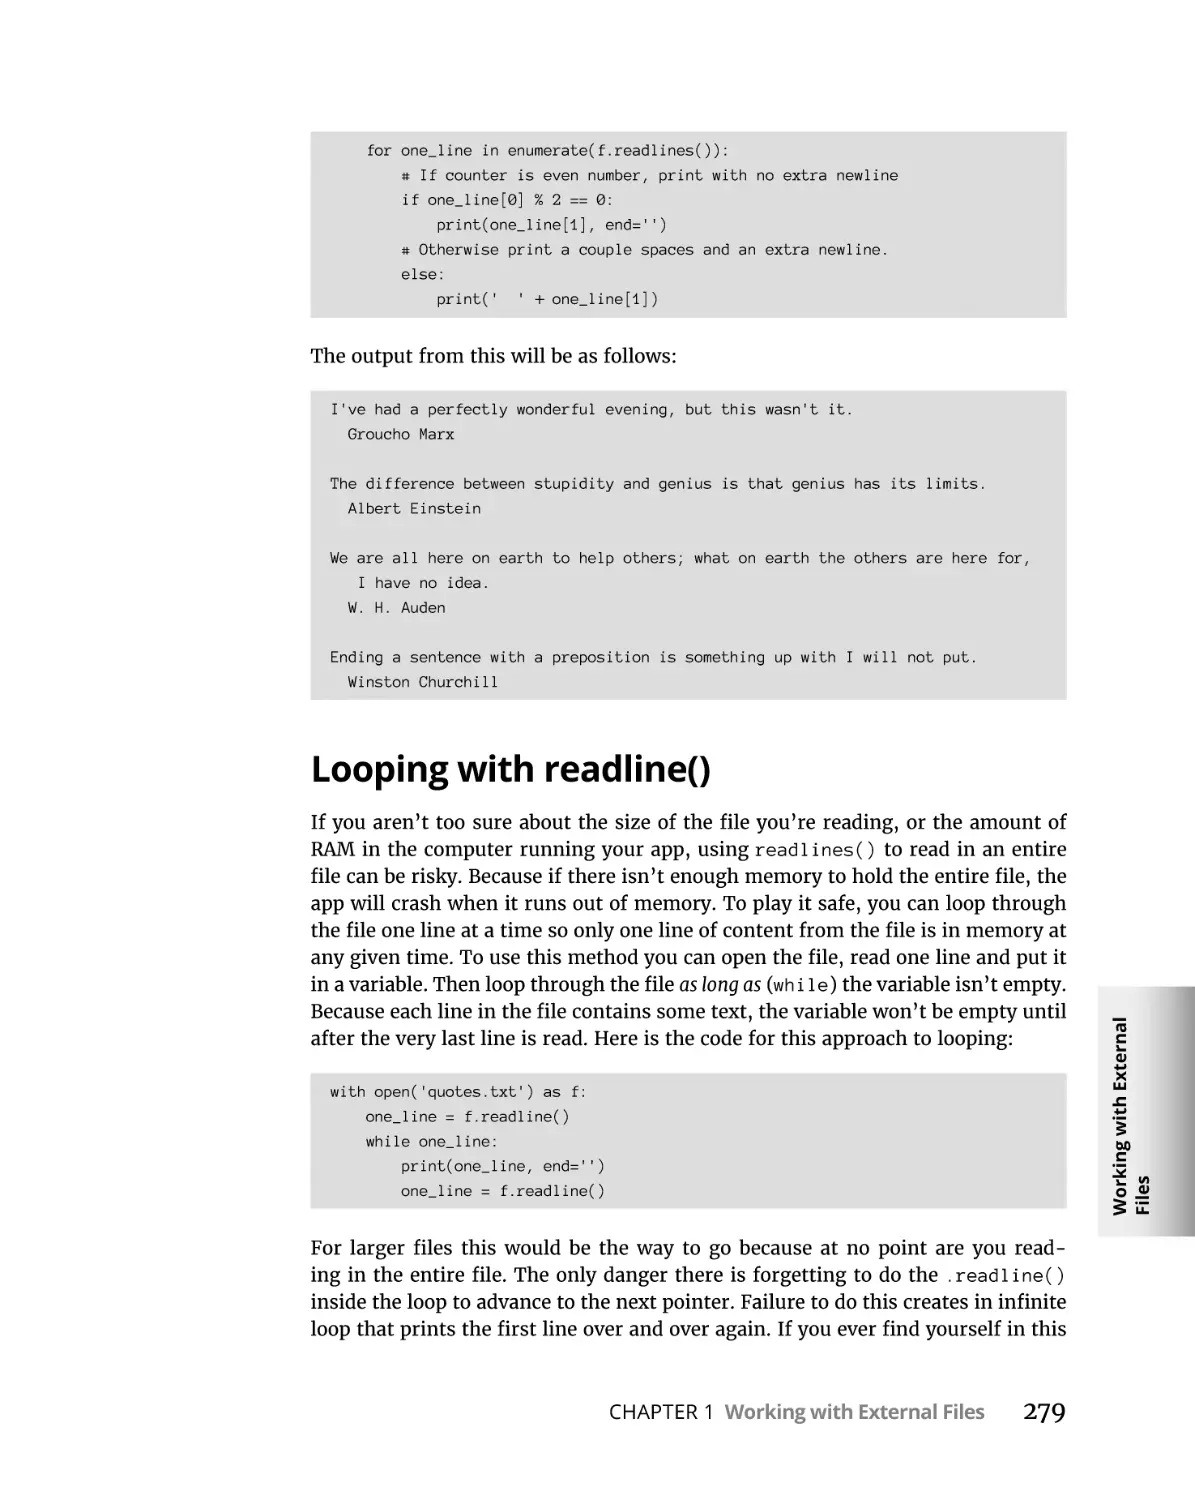 Looping with readline()